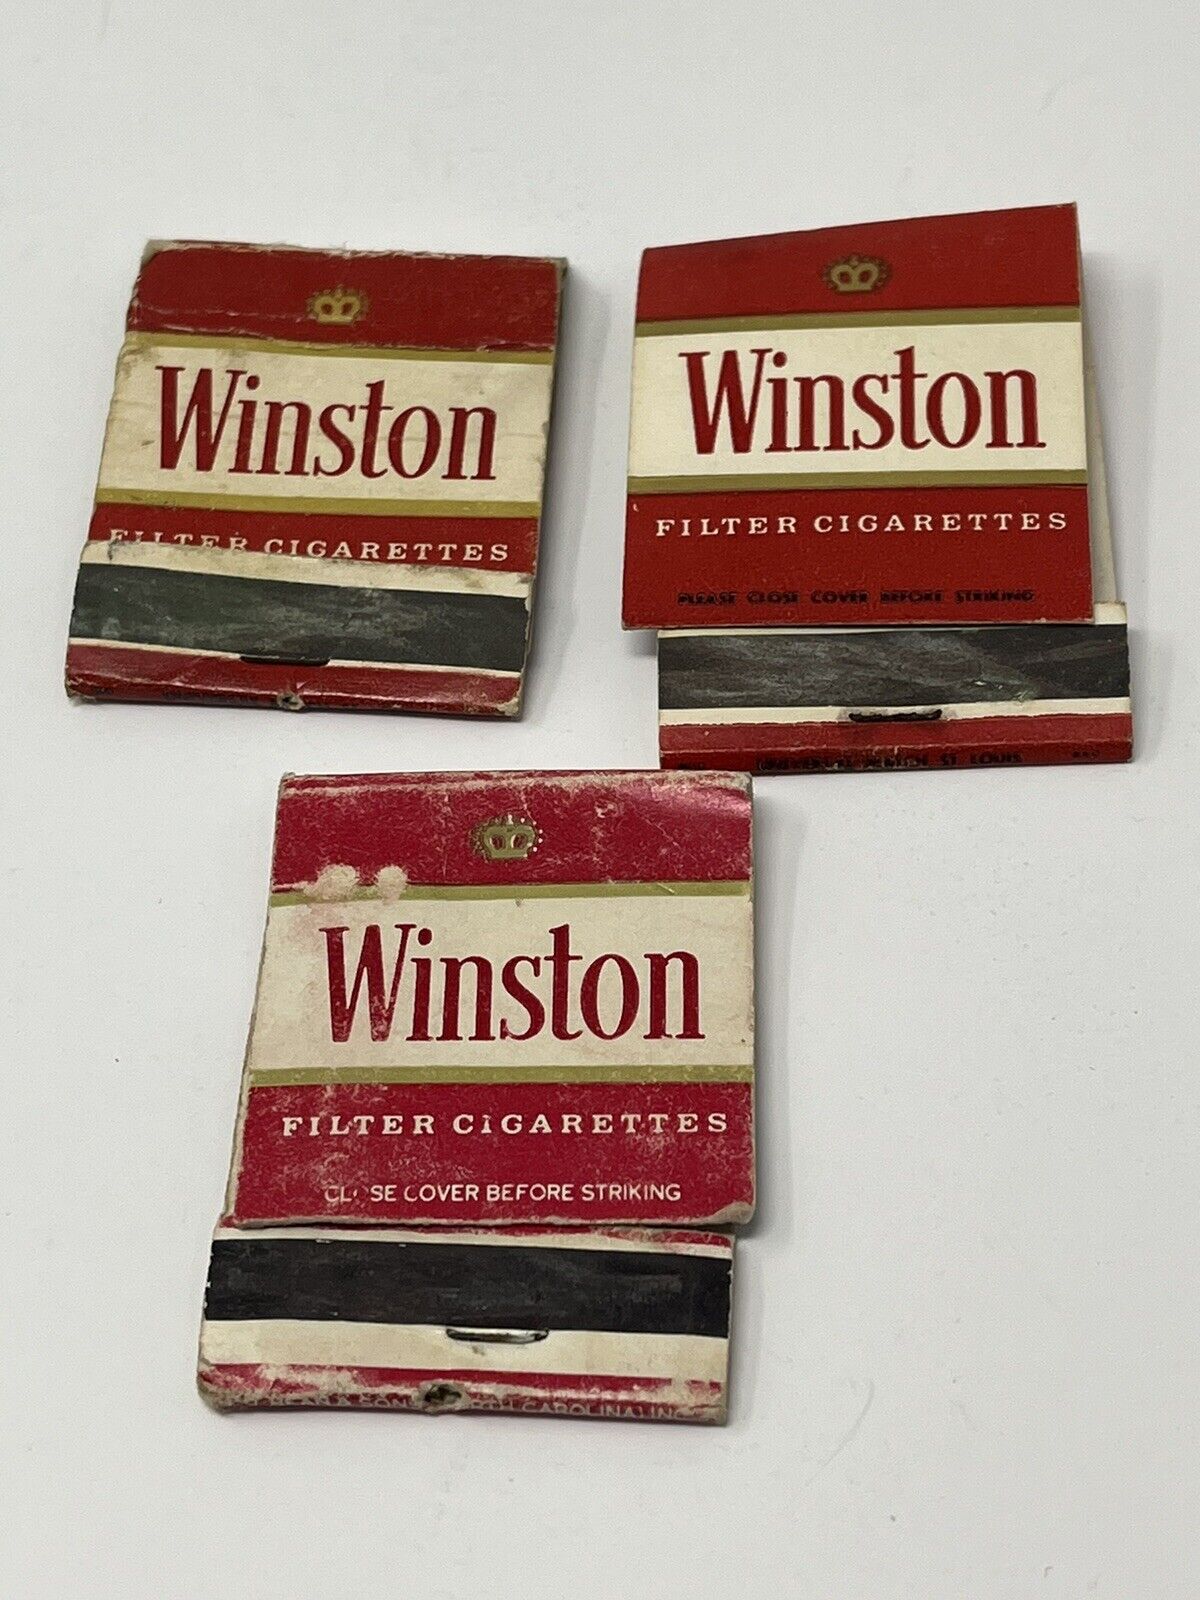 1974 Winston Cigarette Matchbook Covers Lot Of 3 Hoyle's Rules Game Book Offer